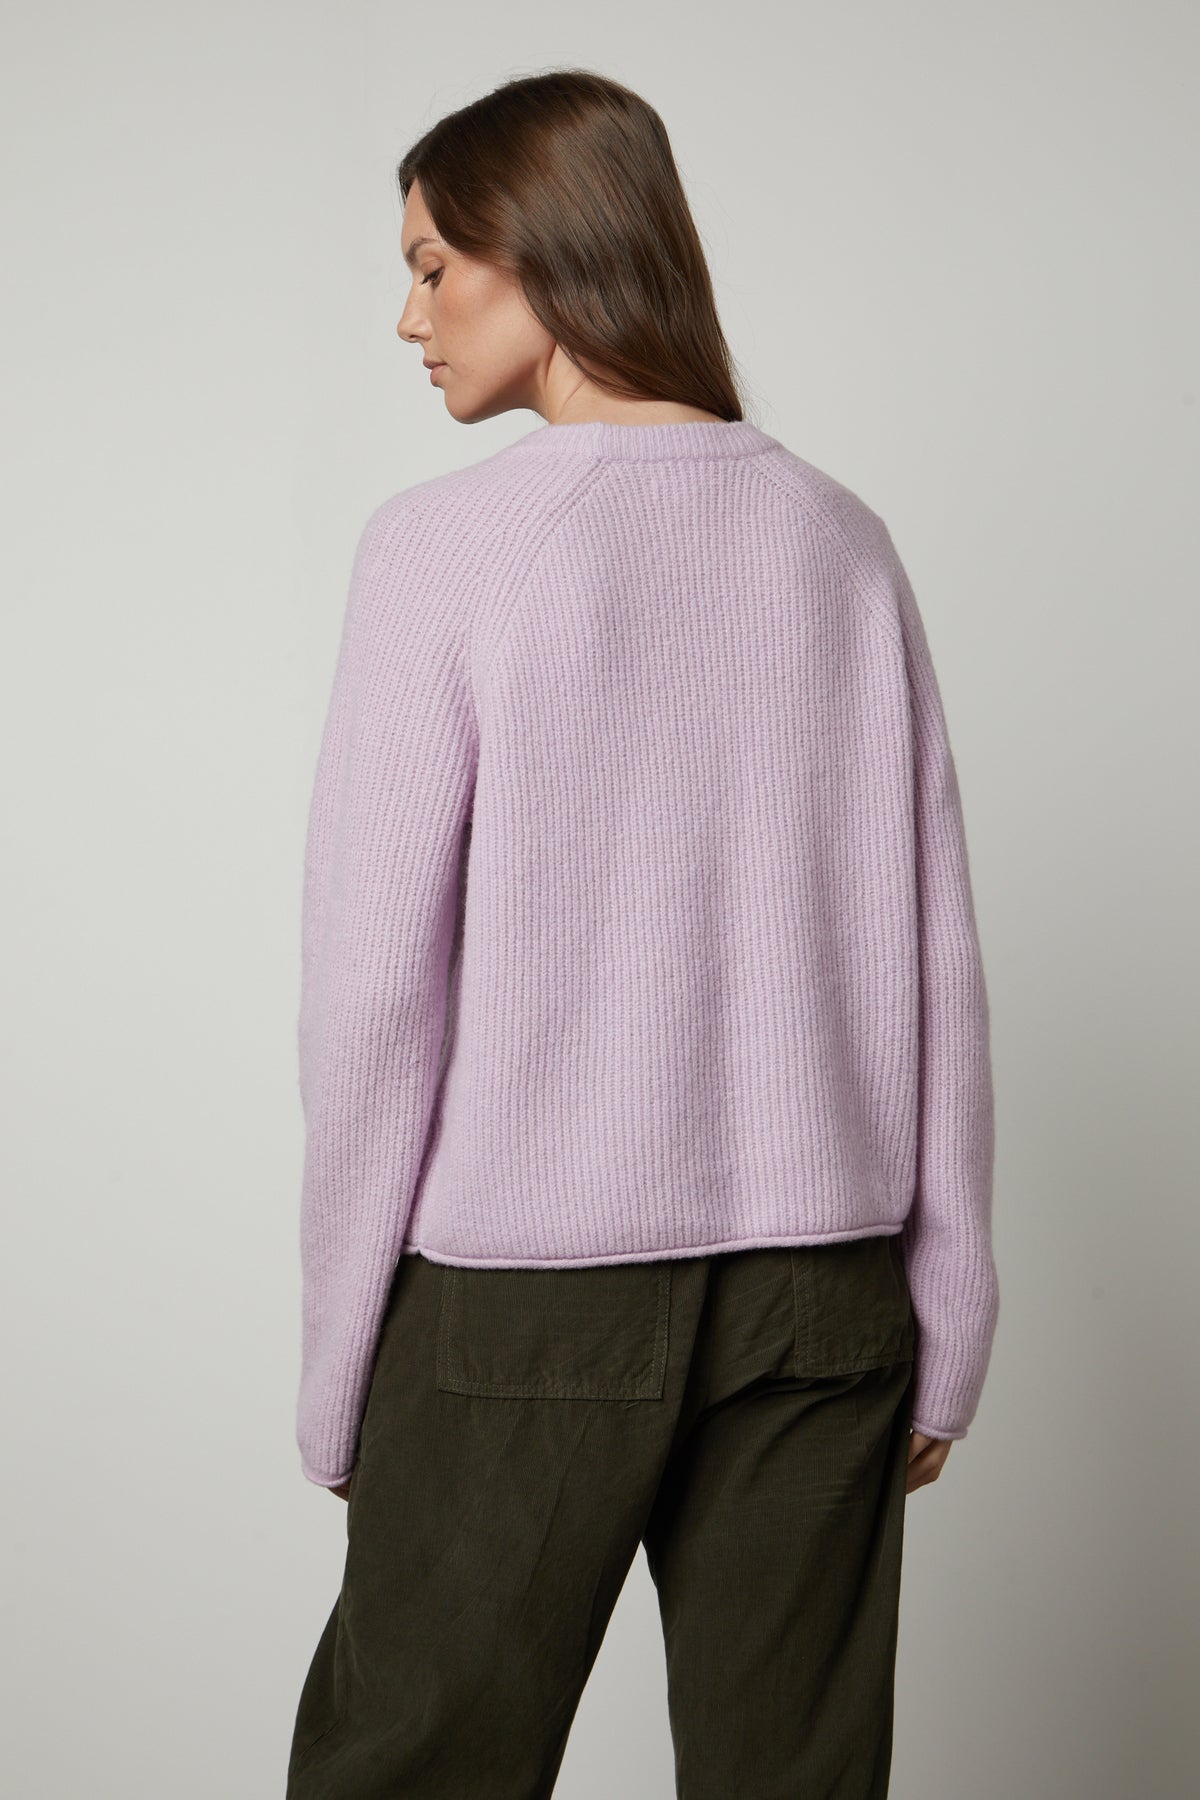   The back view of a woman wearing a Velvet by Graham & Spencer GIGI CREW NECK SWEATER. 